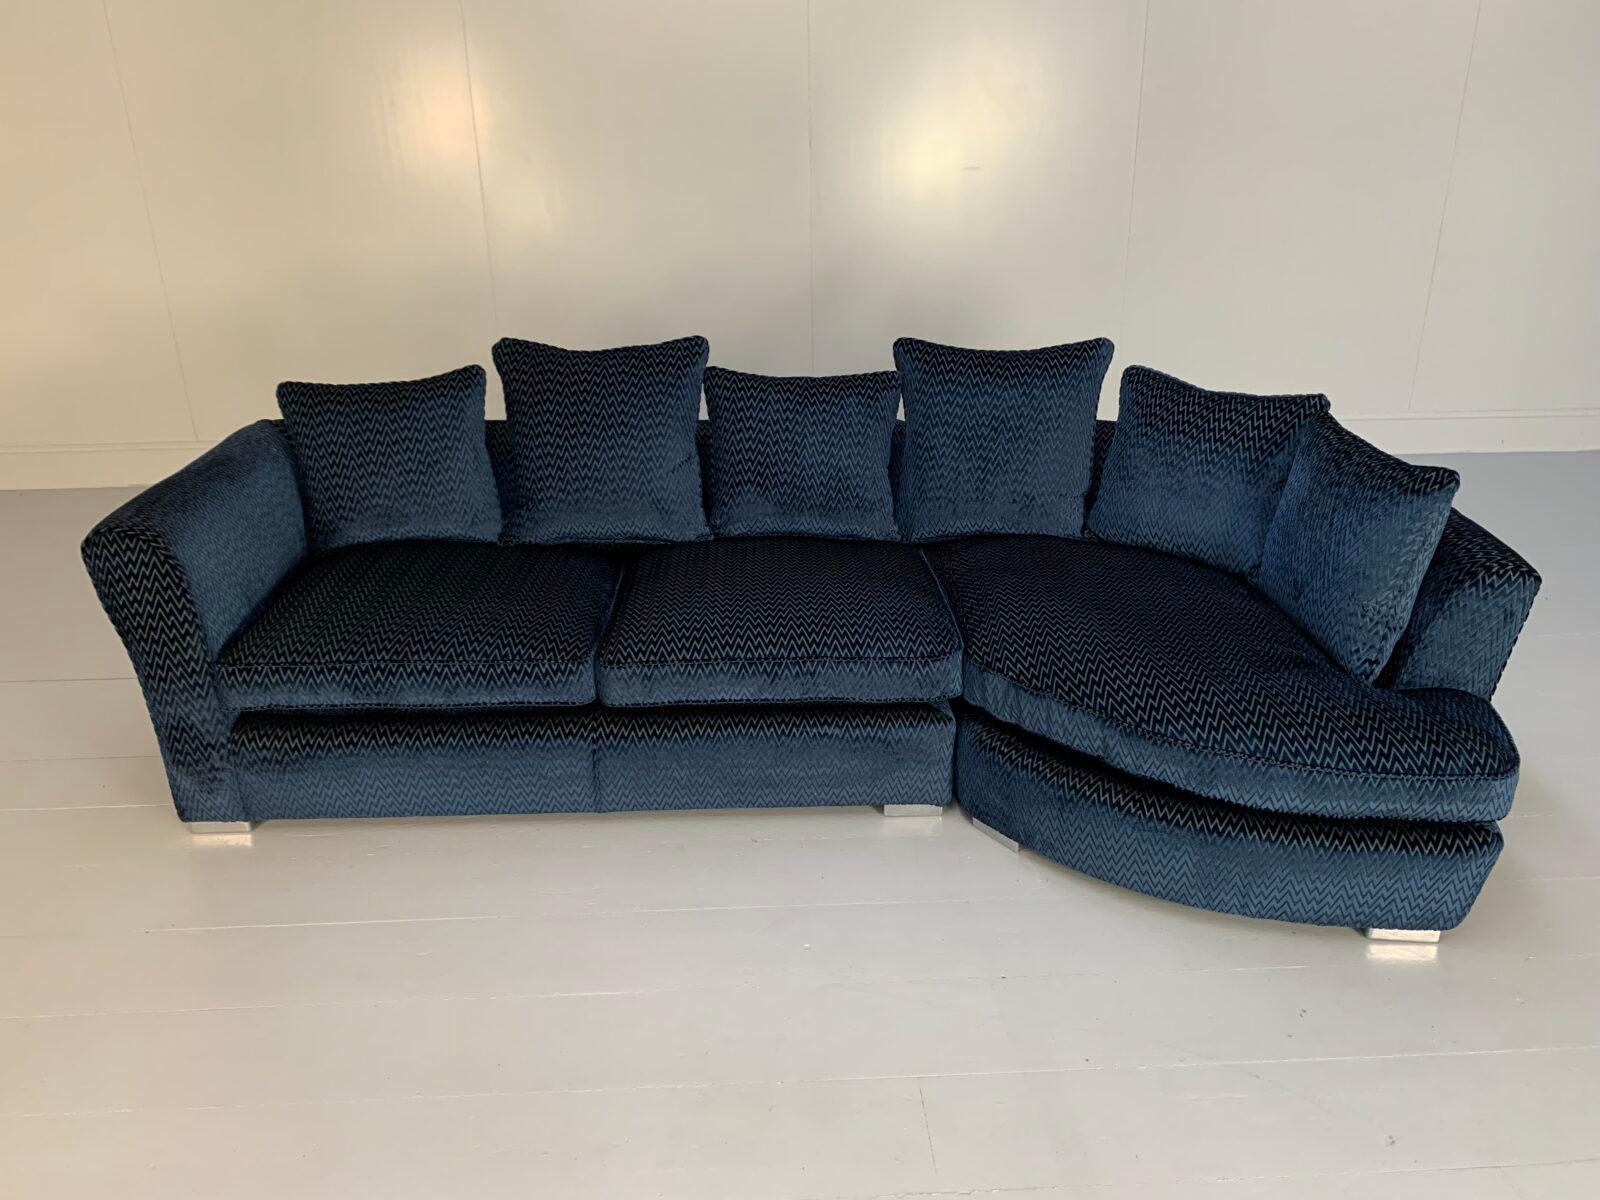 On offer on this occasion is an immaculate, superb, large 4-Seat L-shape Sofa from the world renown Italian furniture house of Fendi Casa.

As you will no doubt be aware by your interest in this Italian masterpiece, Fendi Casa pieces are the epitome